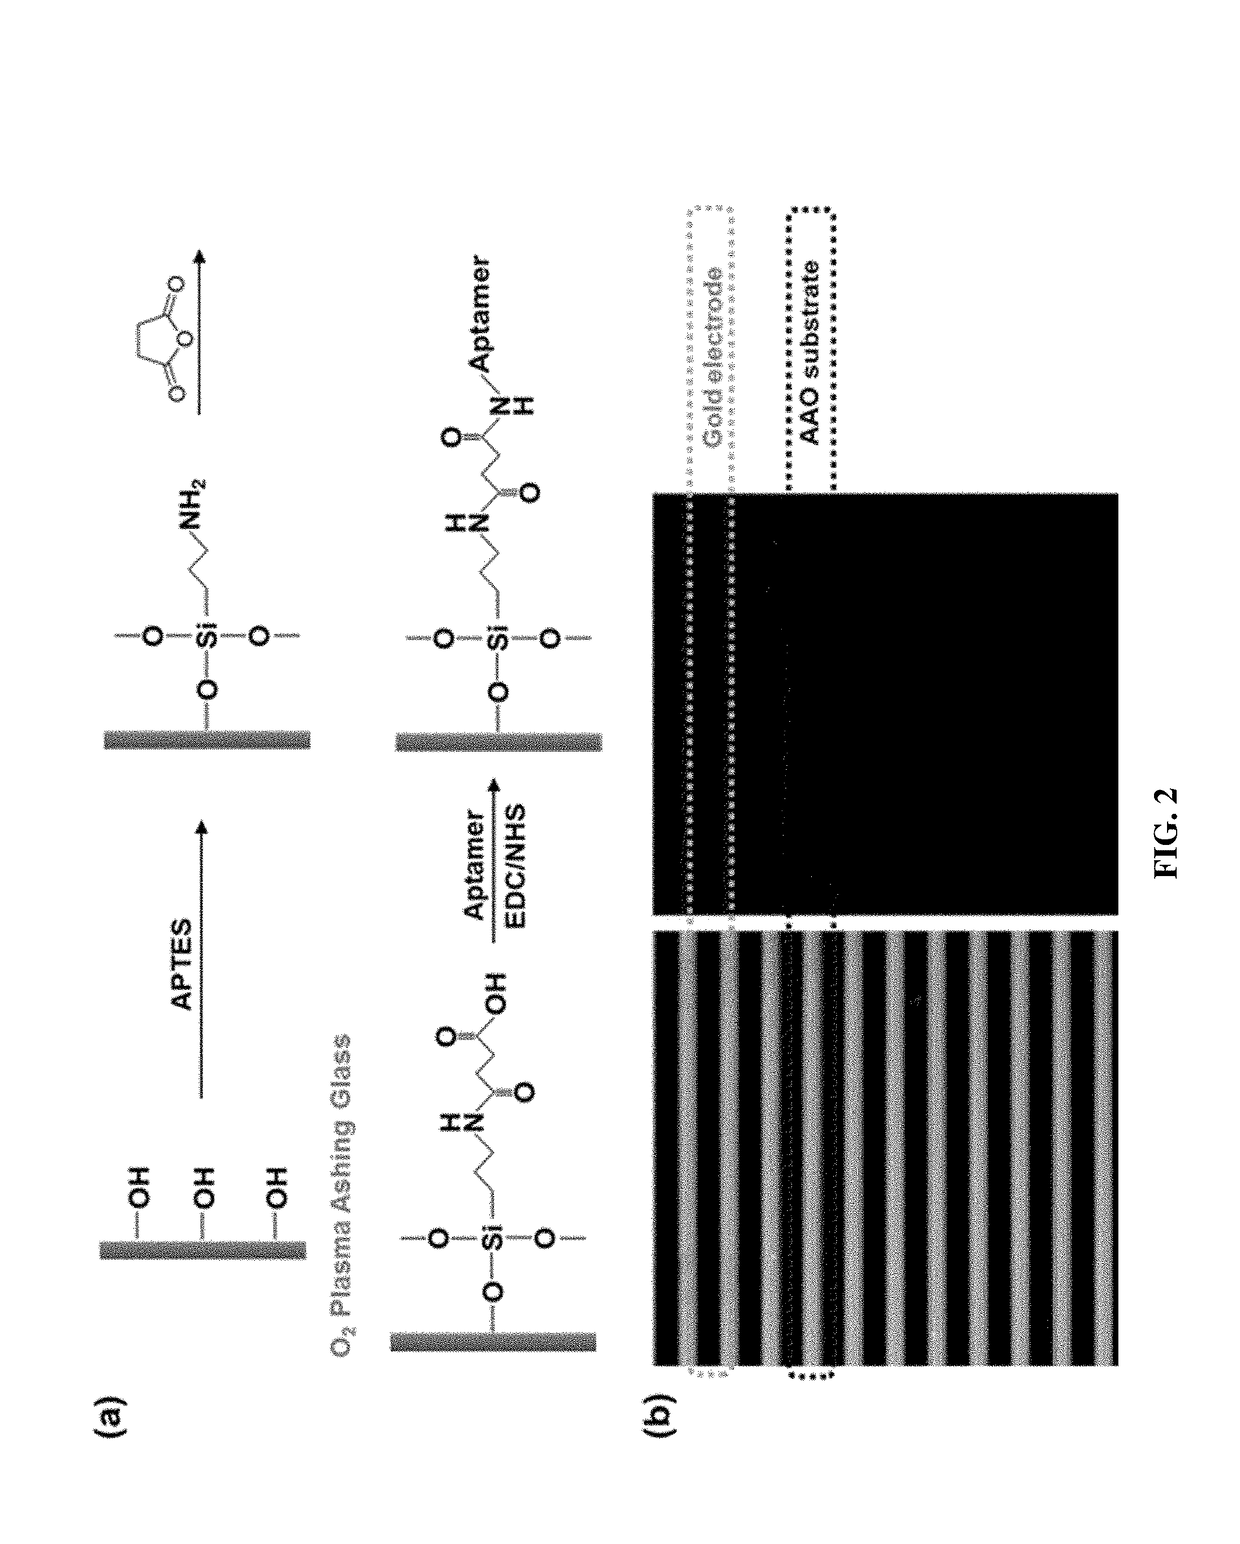 Capacitive biosensor for identifying a microorganism or determining antibiotic susceptibility